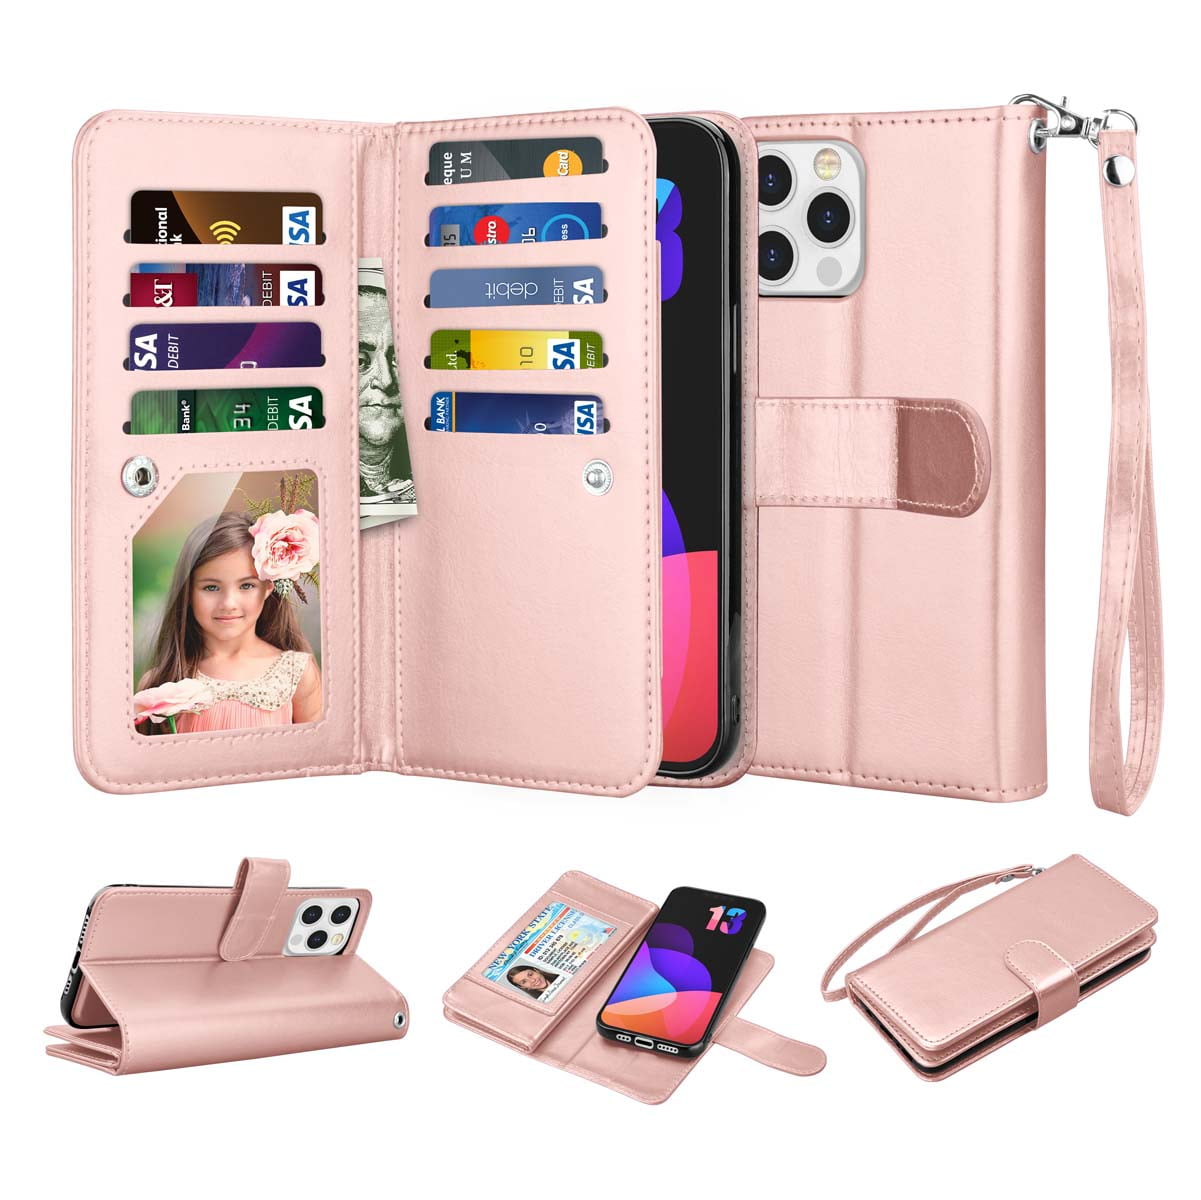  Case for iPhone 13 Wallet Case, XRPow [2 in 1] Magnetic  Detachable Wallet Case Vegan Leather Zipper Clutch Folio Flip Card Solt  Wrist Strap Purse Protection Back Cover for iPhone 13